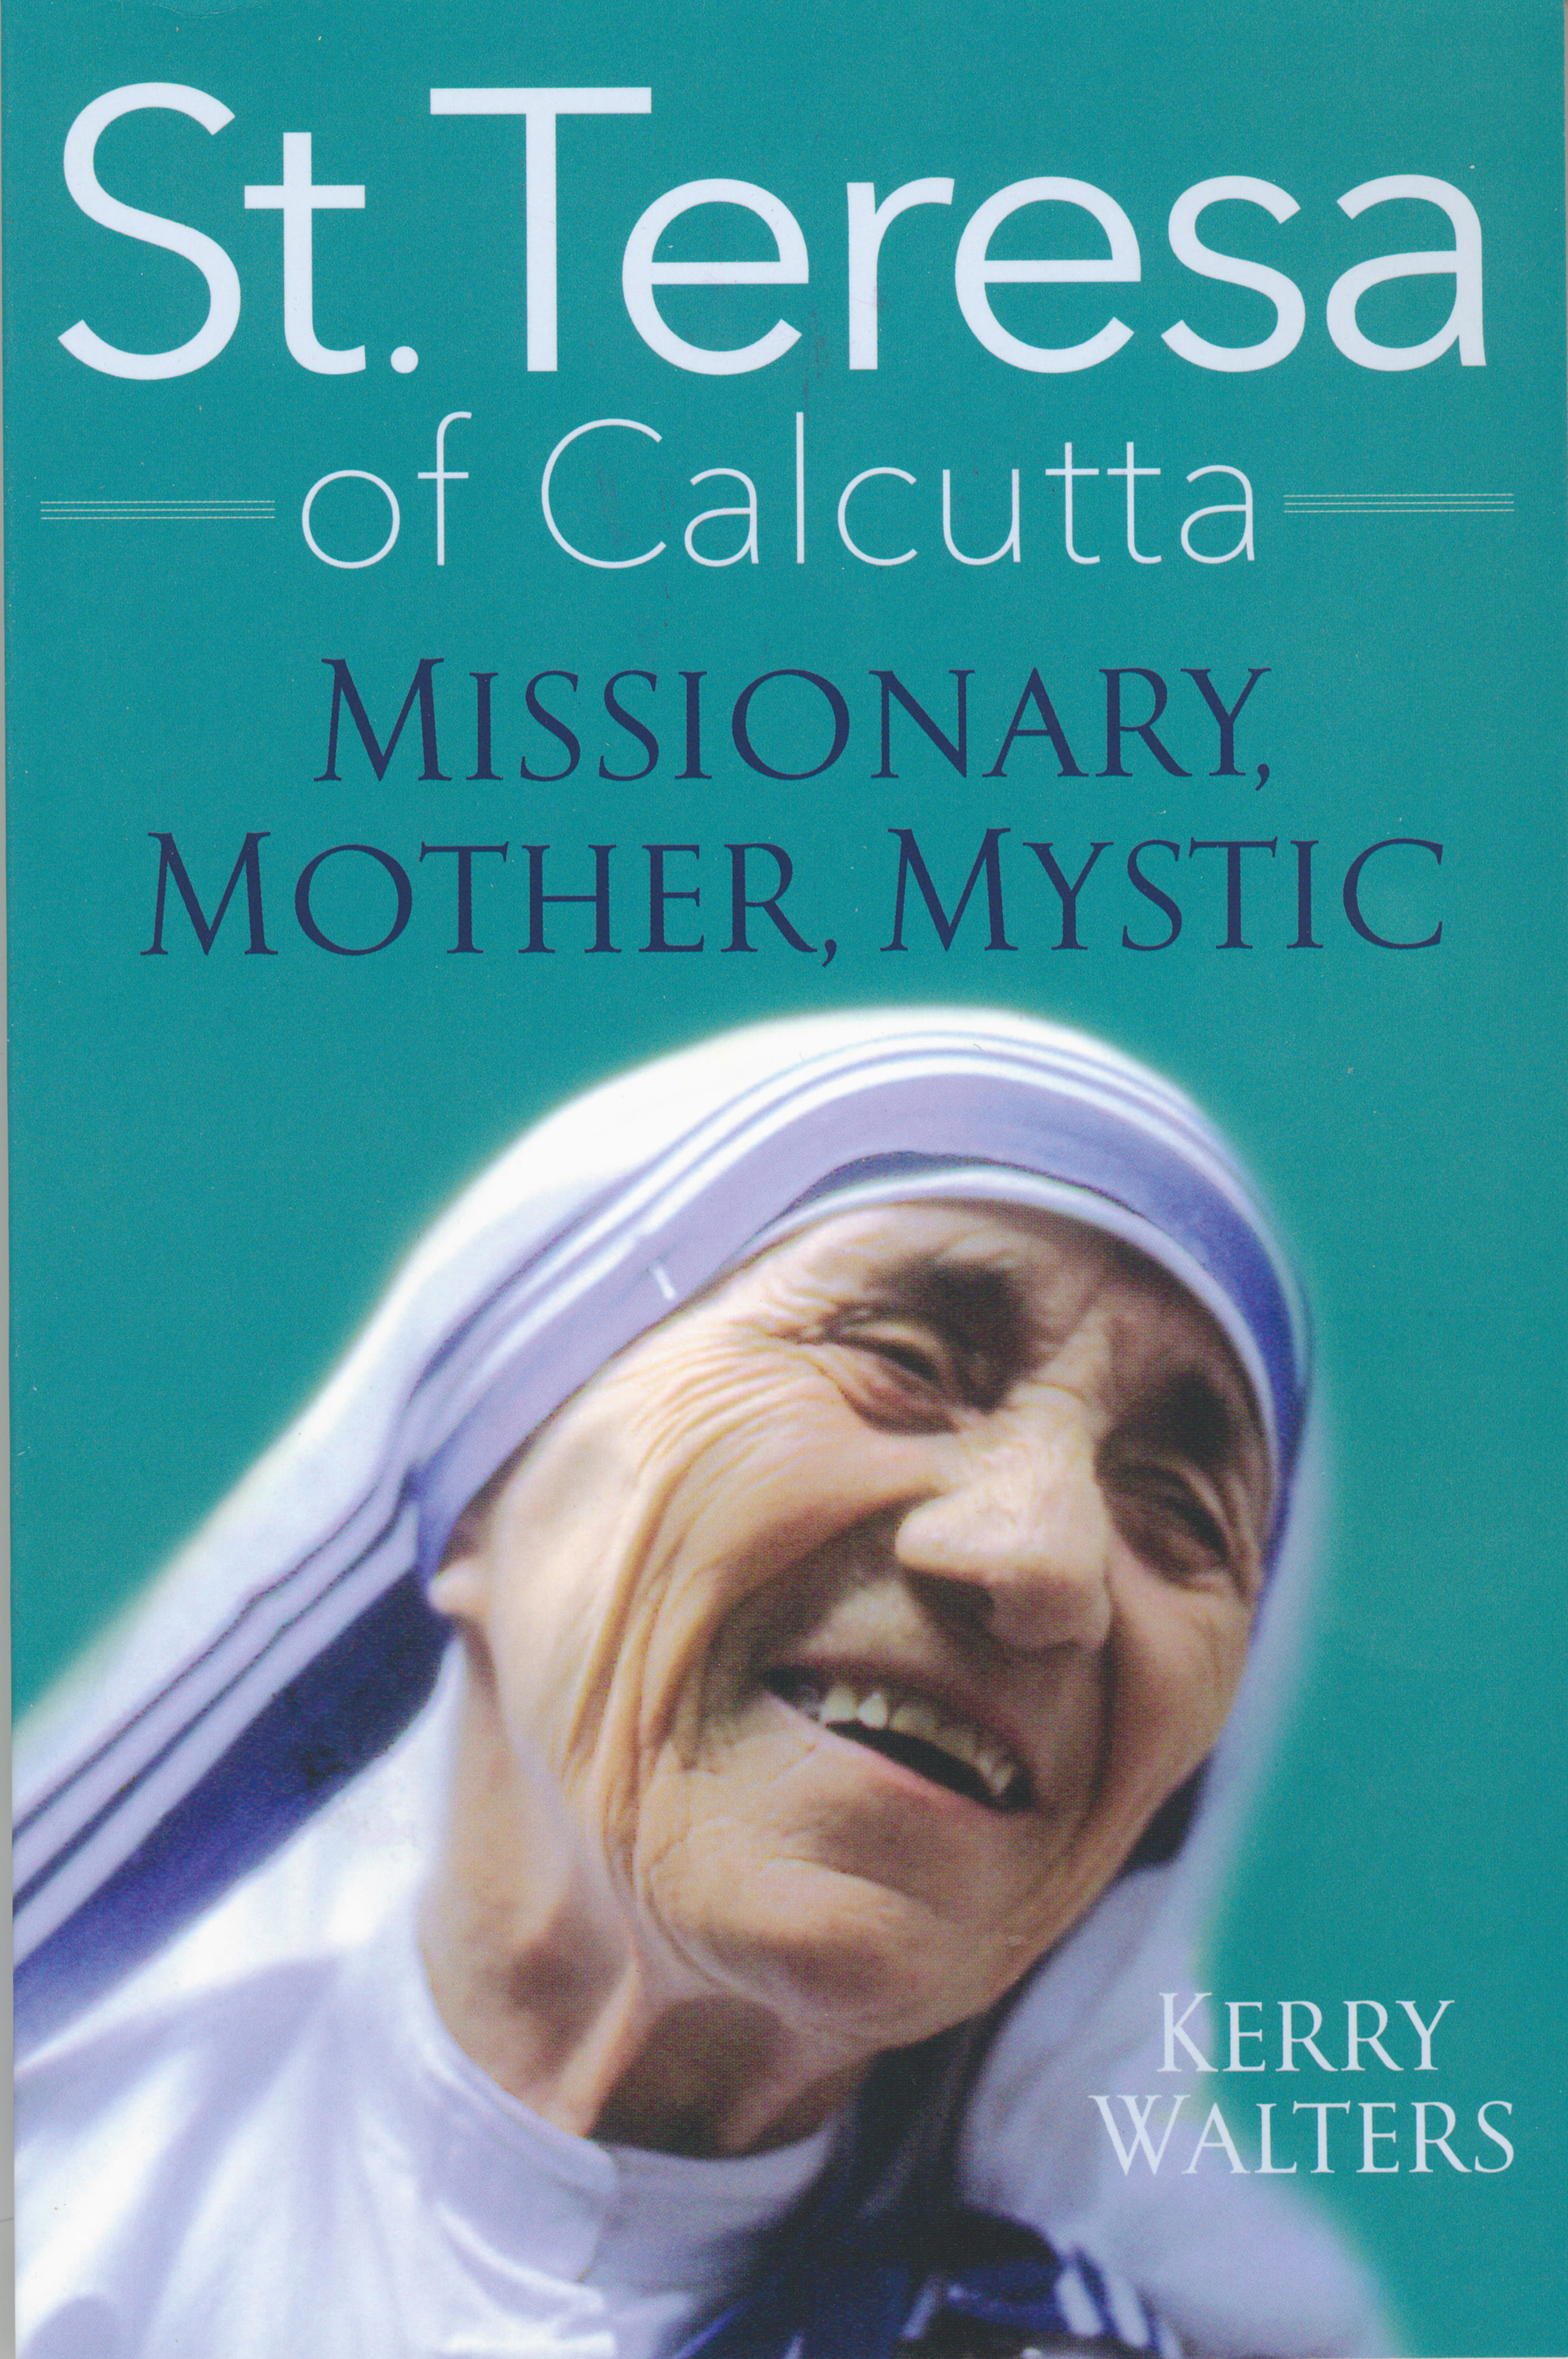 St. Teresa of Calcutta: Missionary, Mother, Mystic by Kerry Walters 108-9781632531247